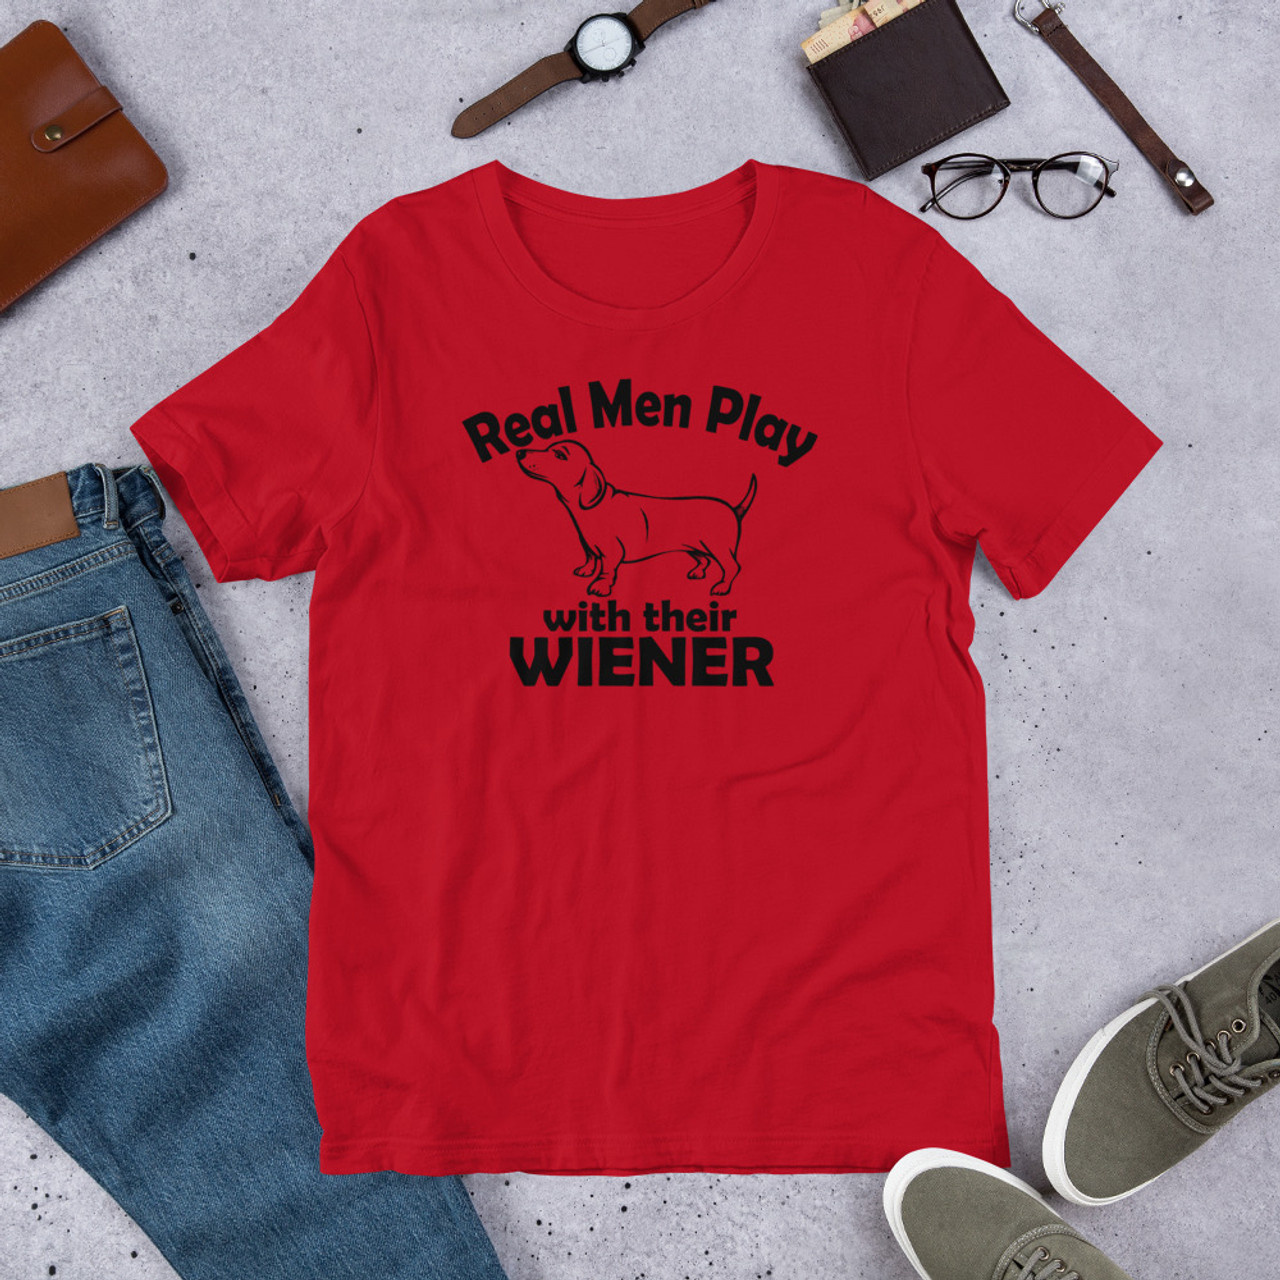 Red T-Shirt - Bella + Canvas 3001 Real Men Play With Their Wiener